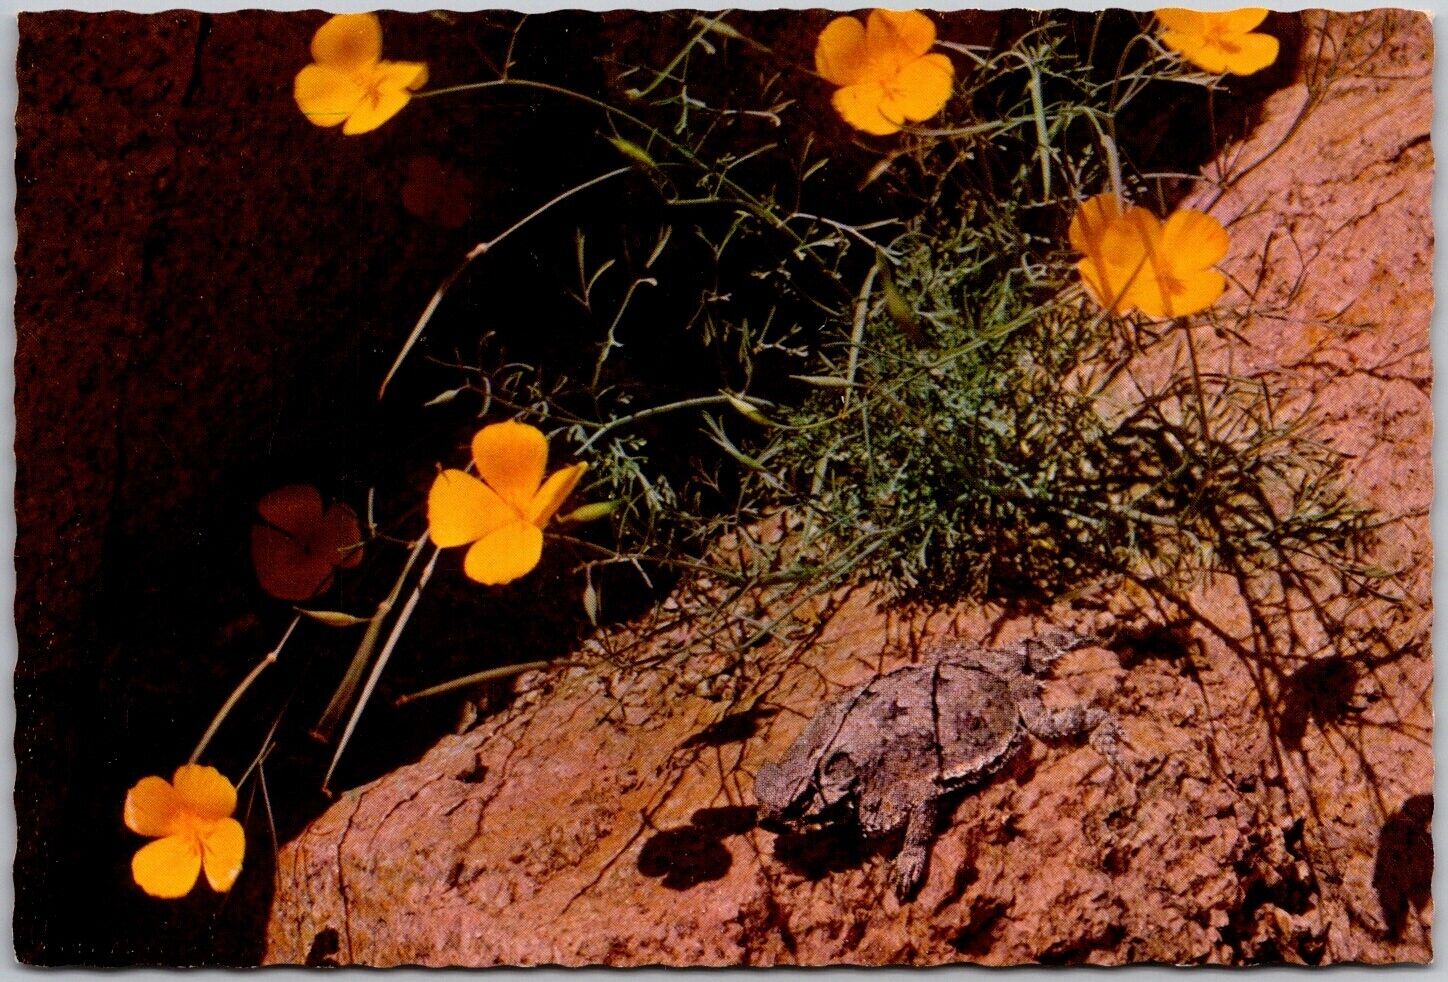 Postcard: Horned Toad and Desert Poppies in Southwestern USA A188